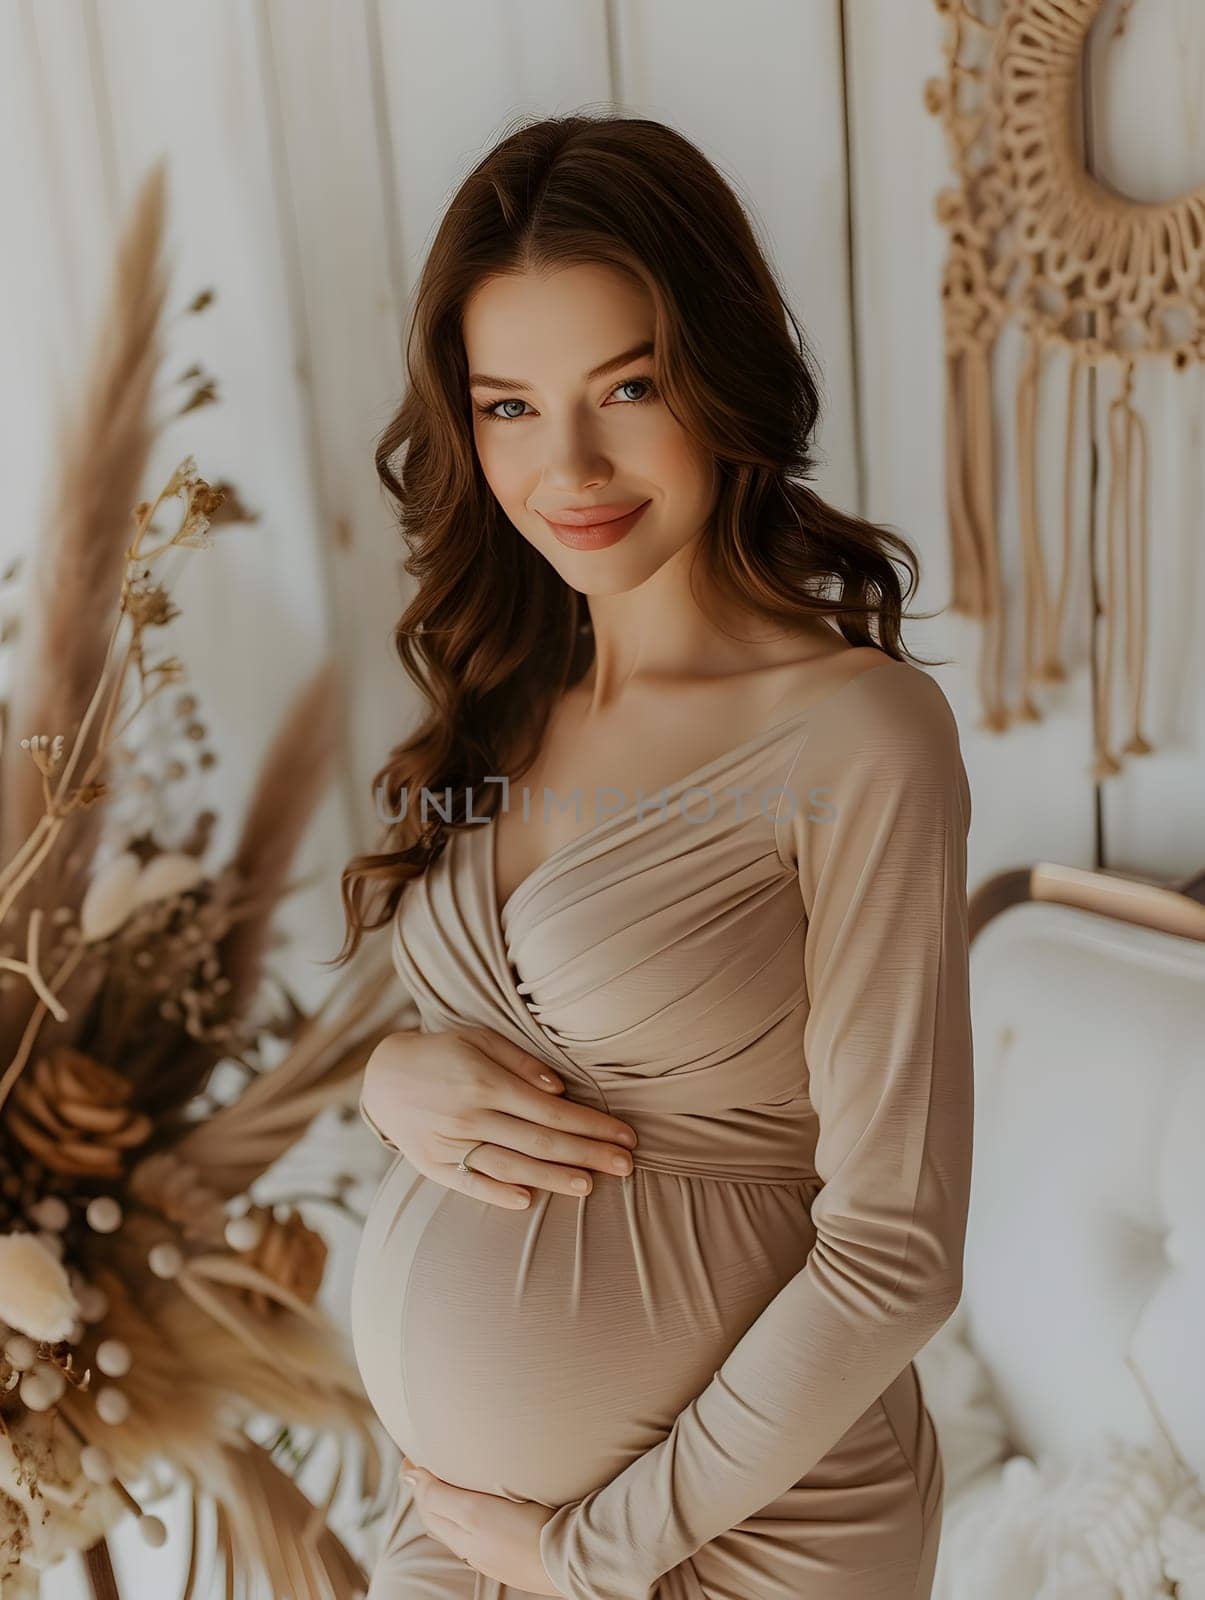 A pregnant woman in a beige gown is showcasing her fashion design, gently holding her waist in a room. The dress features a high neckline and long sleeves, emphasizing her beautiful baby bump